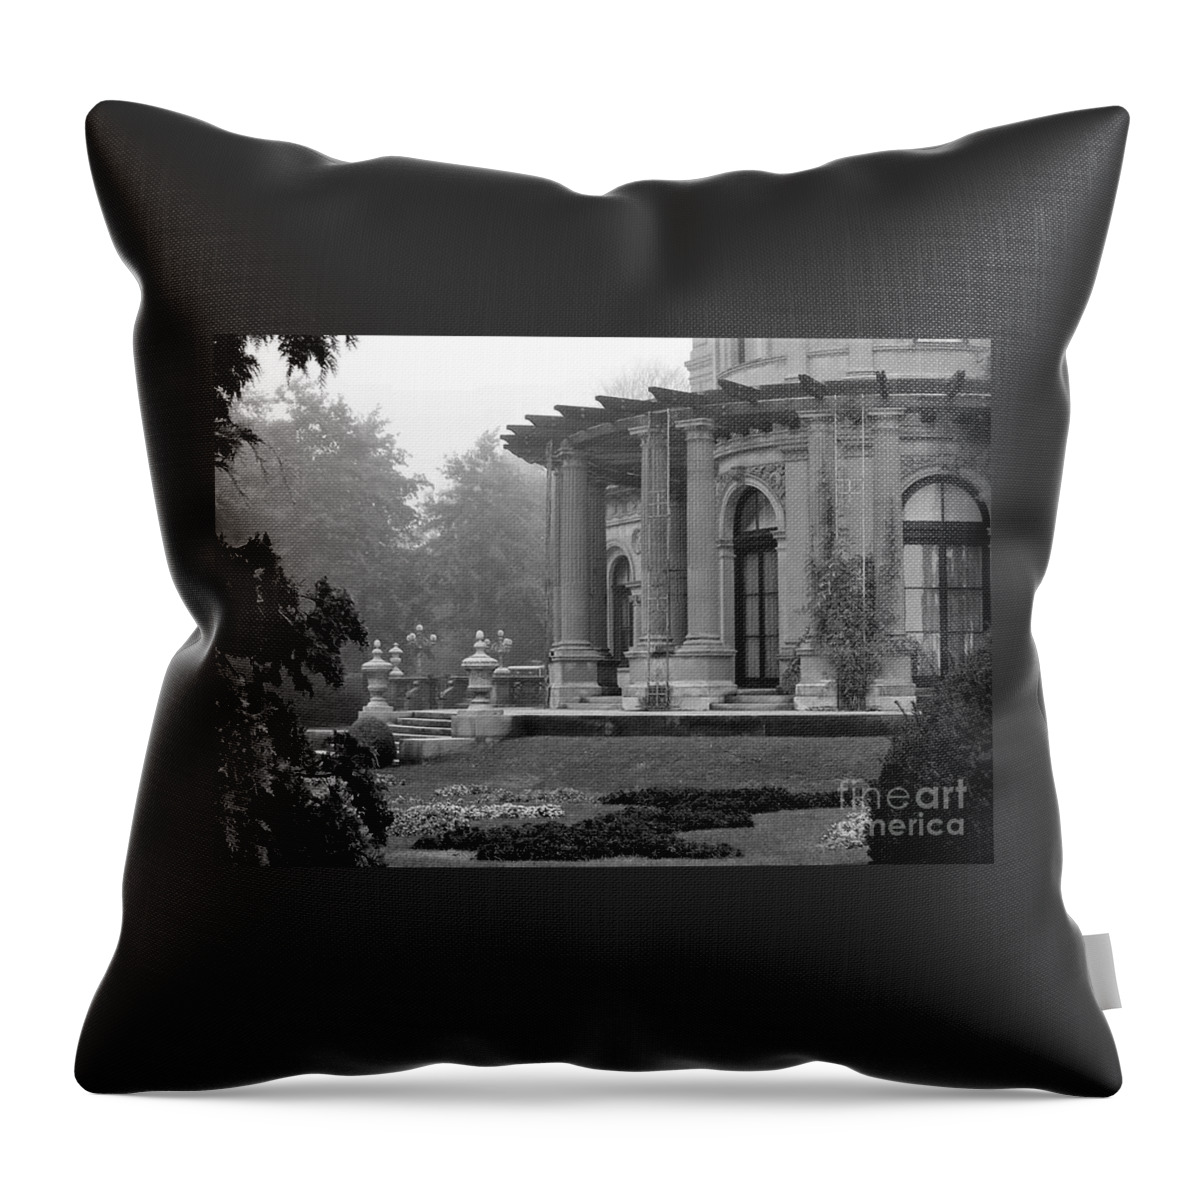  Throw Pillow featuring the photograph Shelter by Marilyn Smith